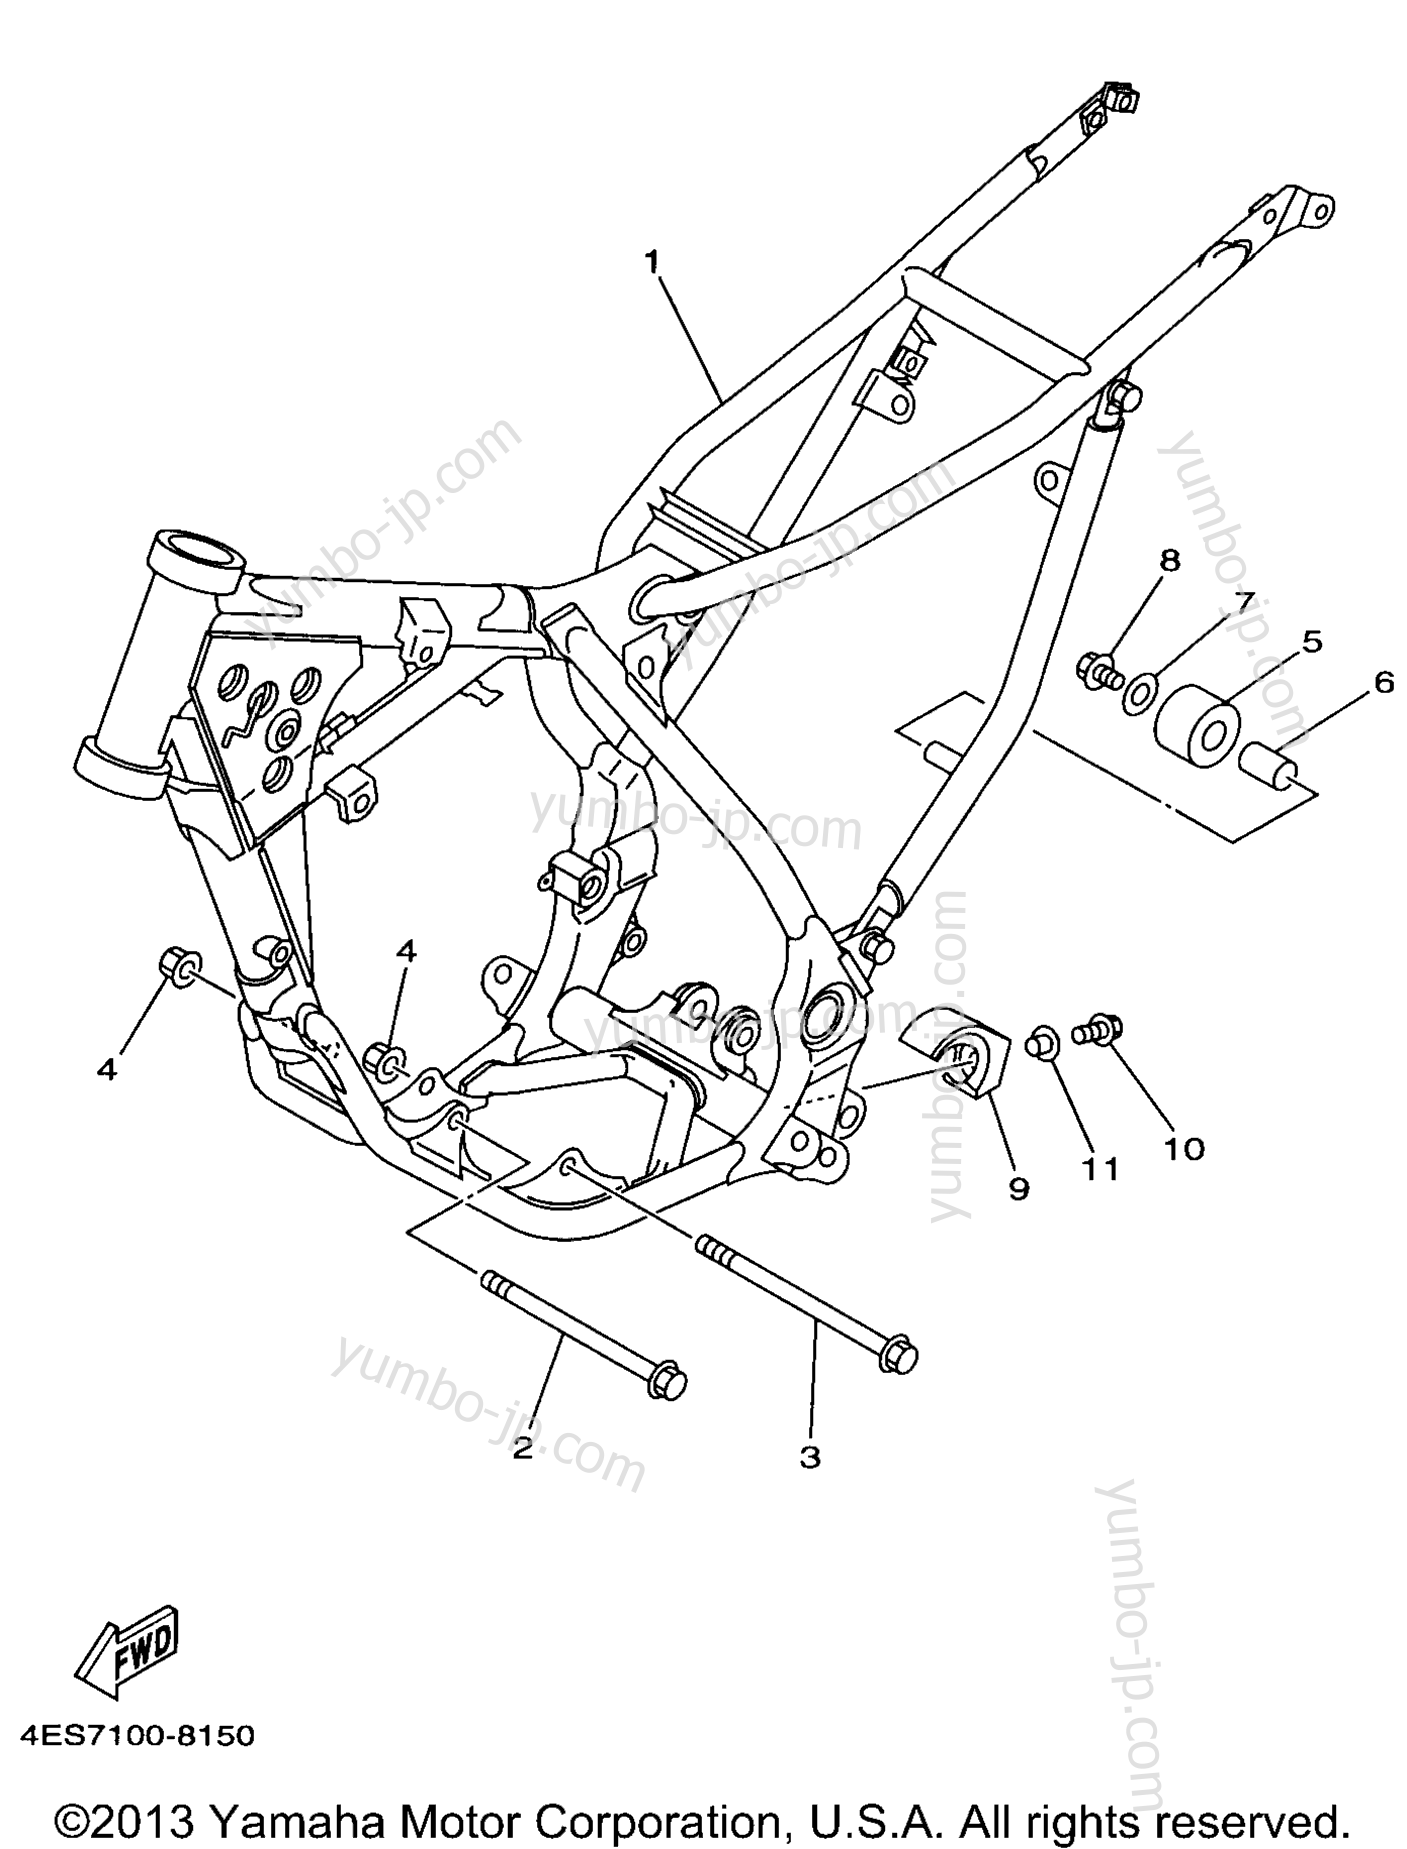 FRAME for motorcycles YAMAHA YZ80 (YZ80K1) 1998 year